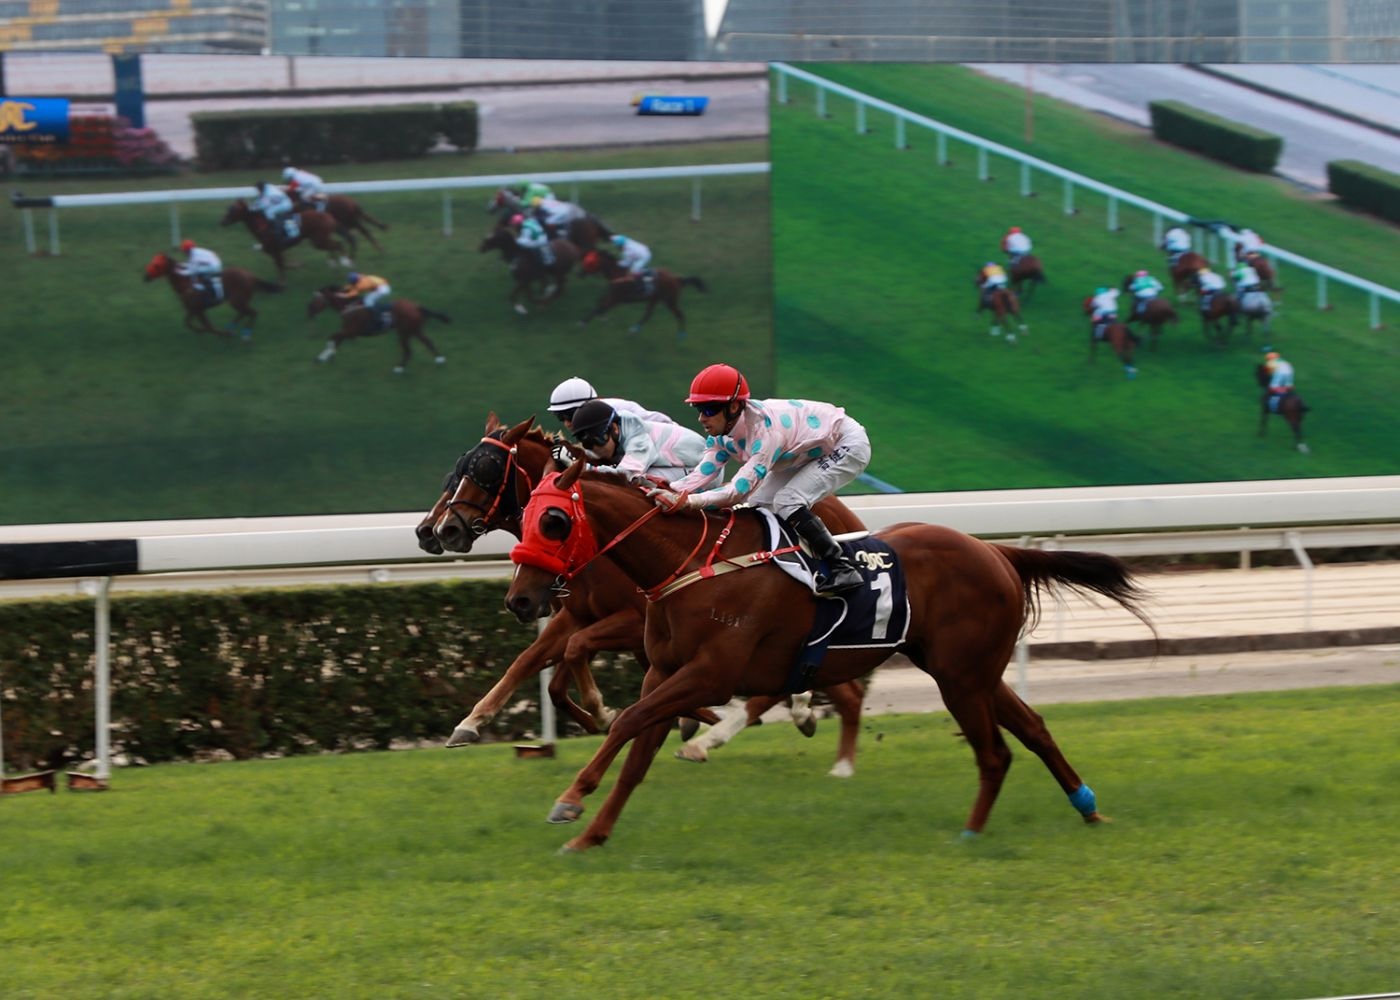 Five things you may not know about the history of the Macau Jockey Club